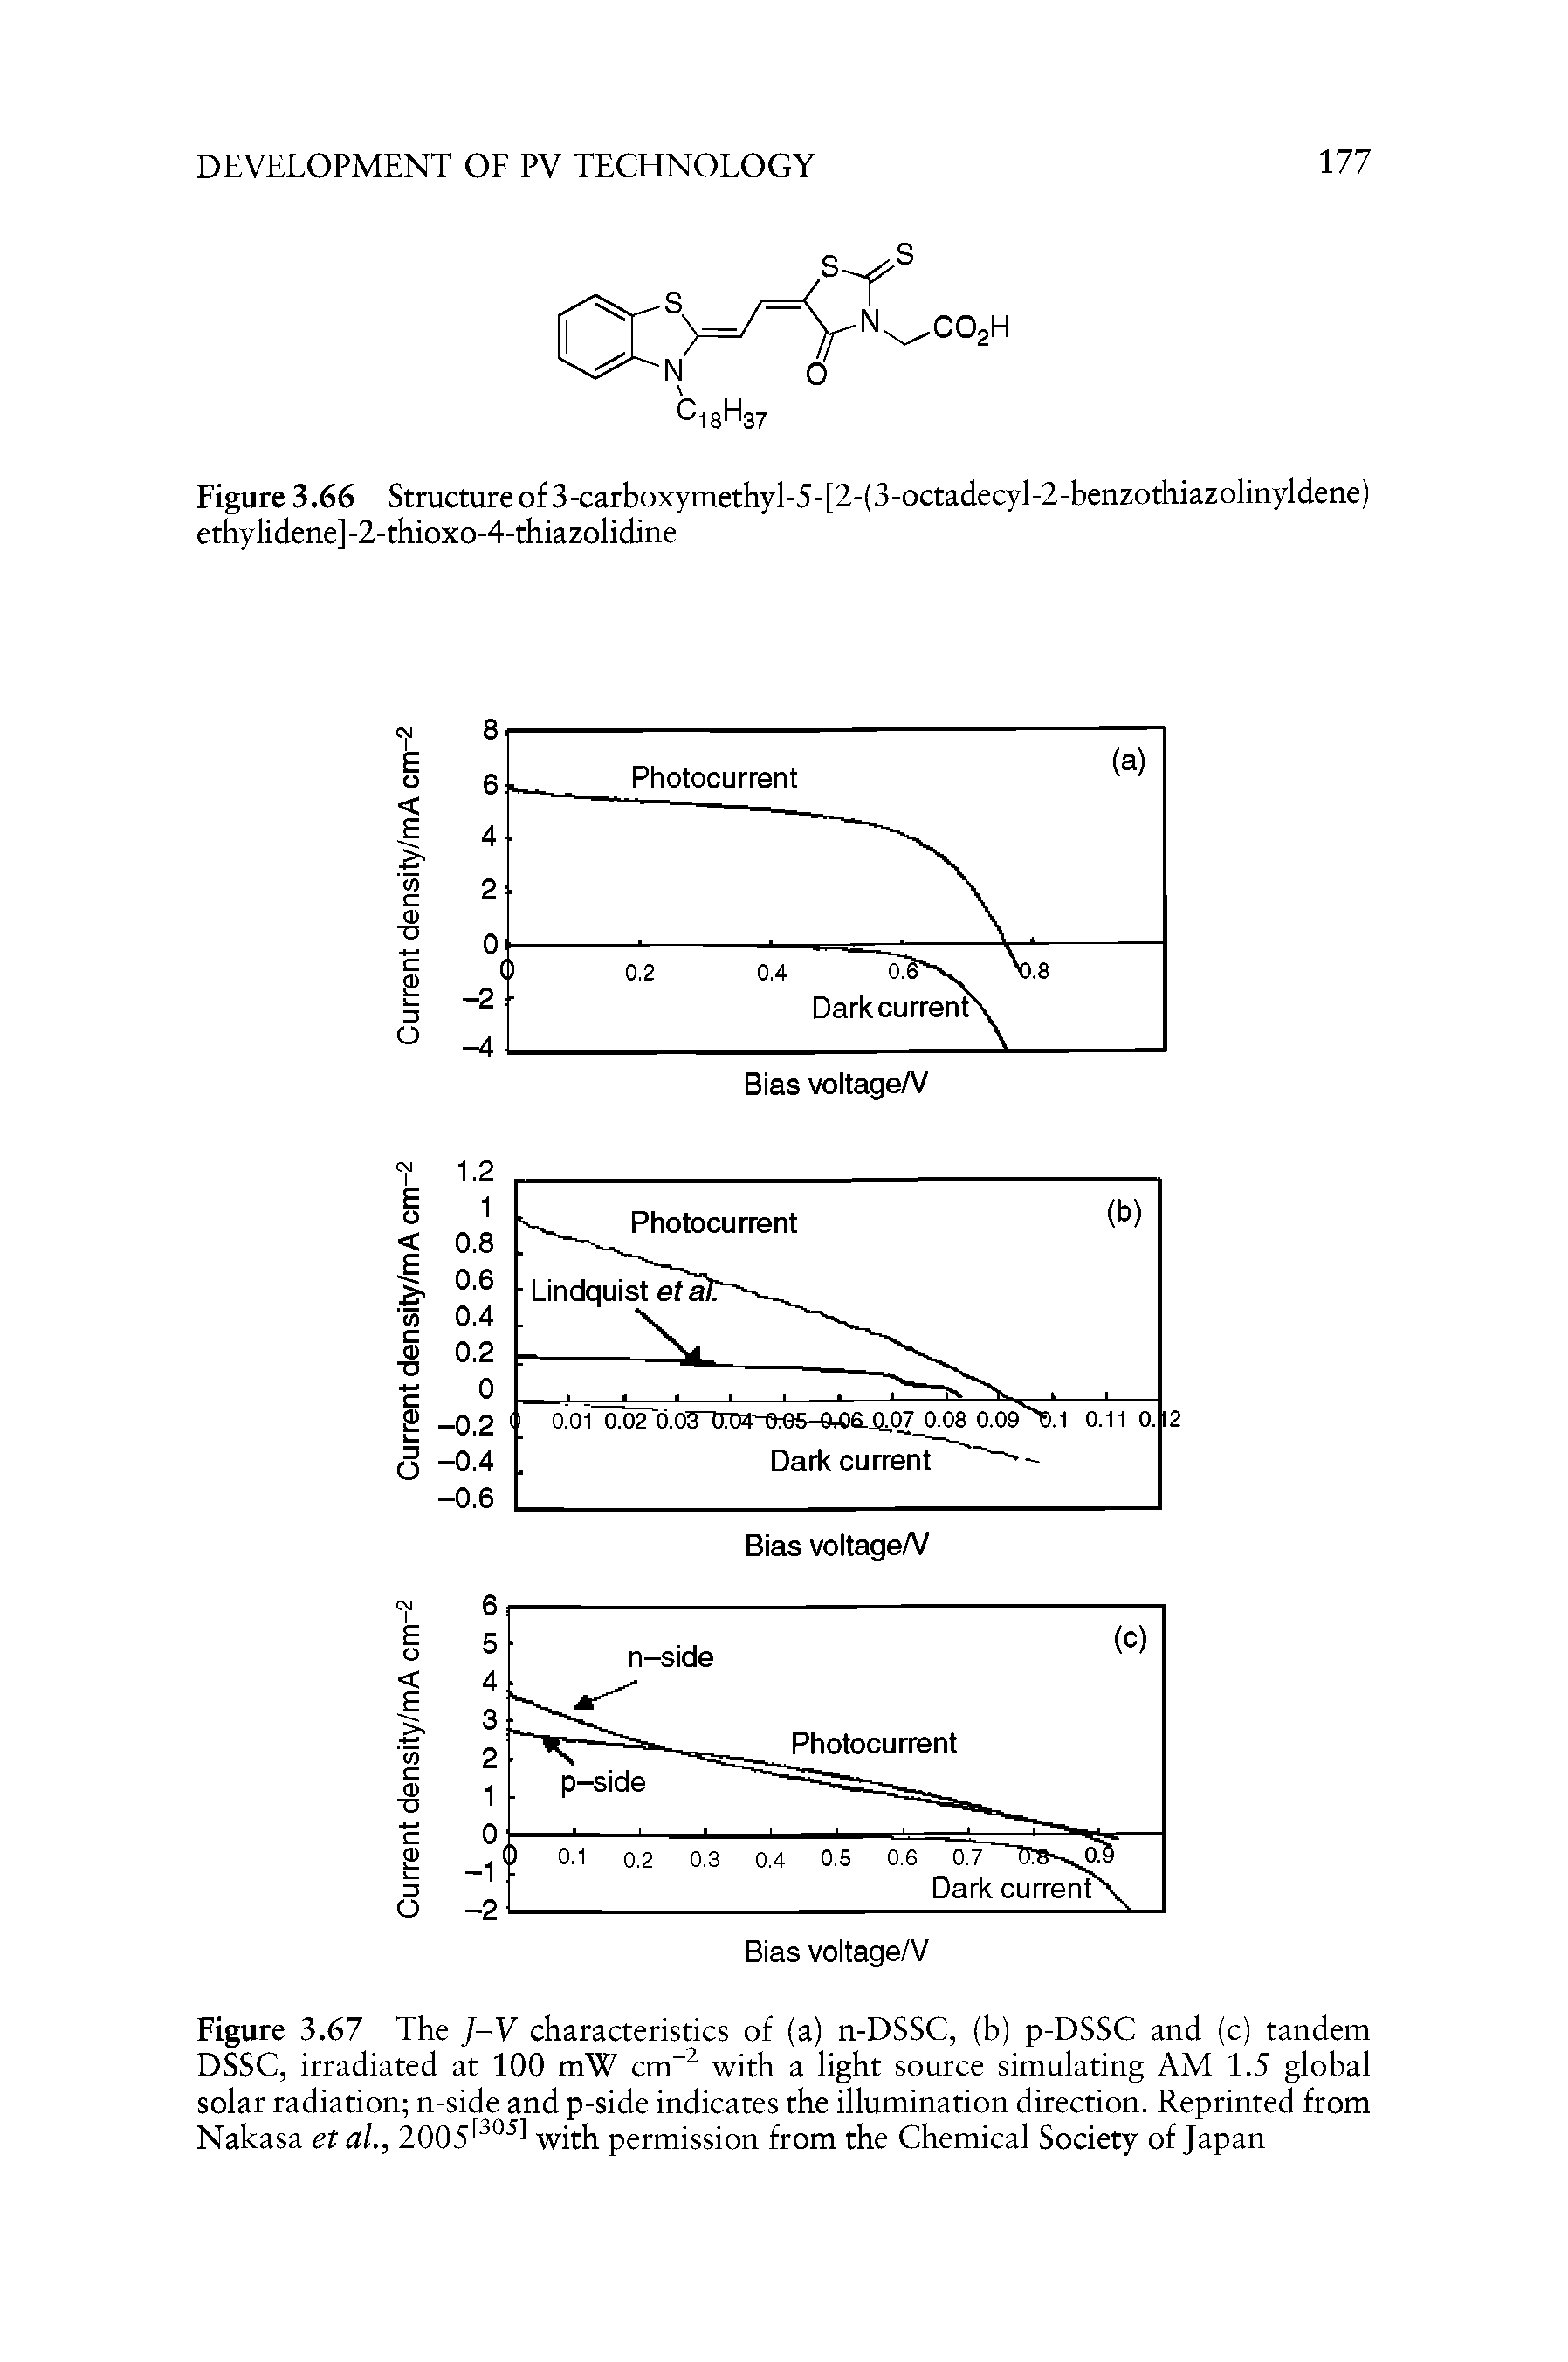 Figure 3.67 The J-V characteristics of (a) n-DSSC, (b) p-DSSC and (c) tandem DSSC, irradiated at 100 mW cm with a light source simulating AM 1.5 global solar radiation n-side and p-side indicates the illumination direction. Reprinted from Nakasa etal., 2005 with permission from the Chemical Society of Japan...